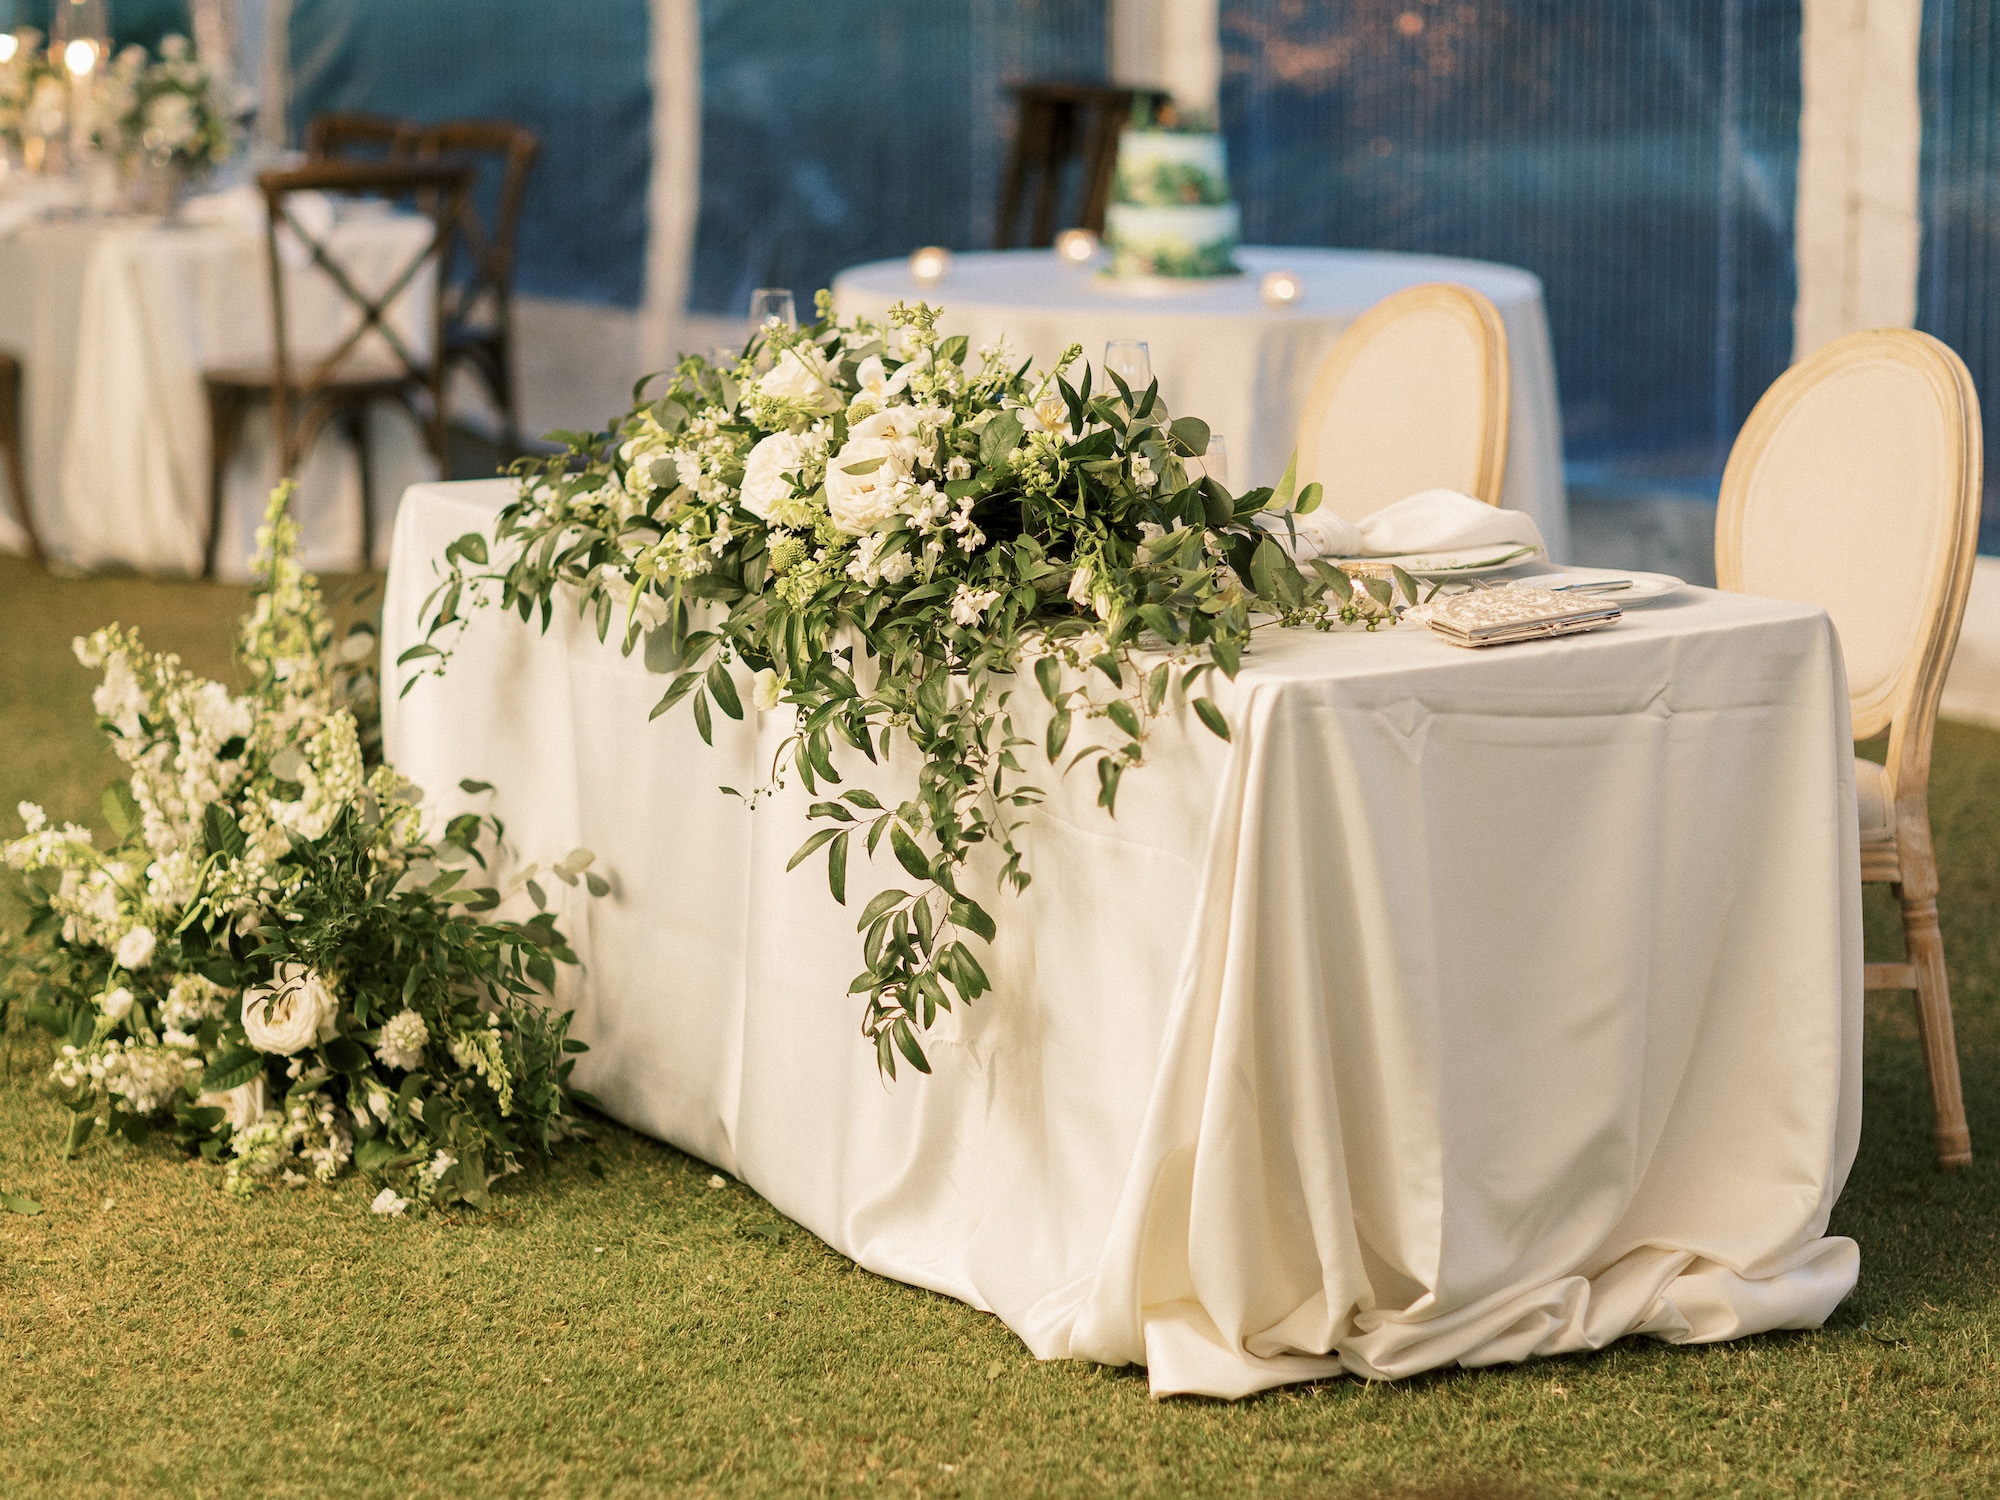 Old Florida Elegant Outdoor Tent Wedding Reception Decor, Sweetheart Table with White Linen, Cream Dining Chairs, Lush Greenery and White Roses Florals